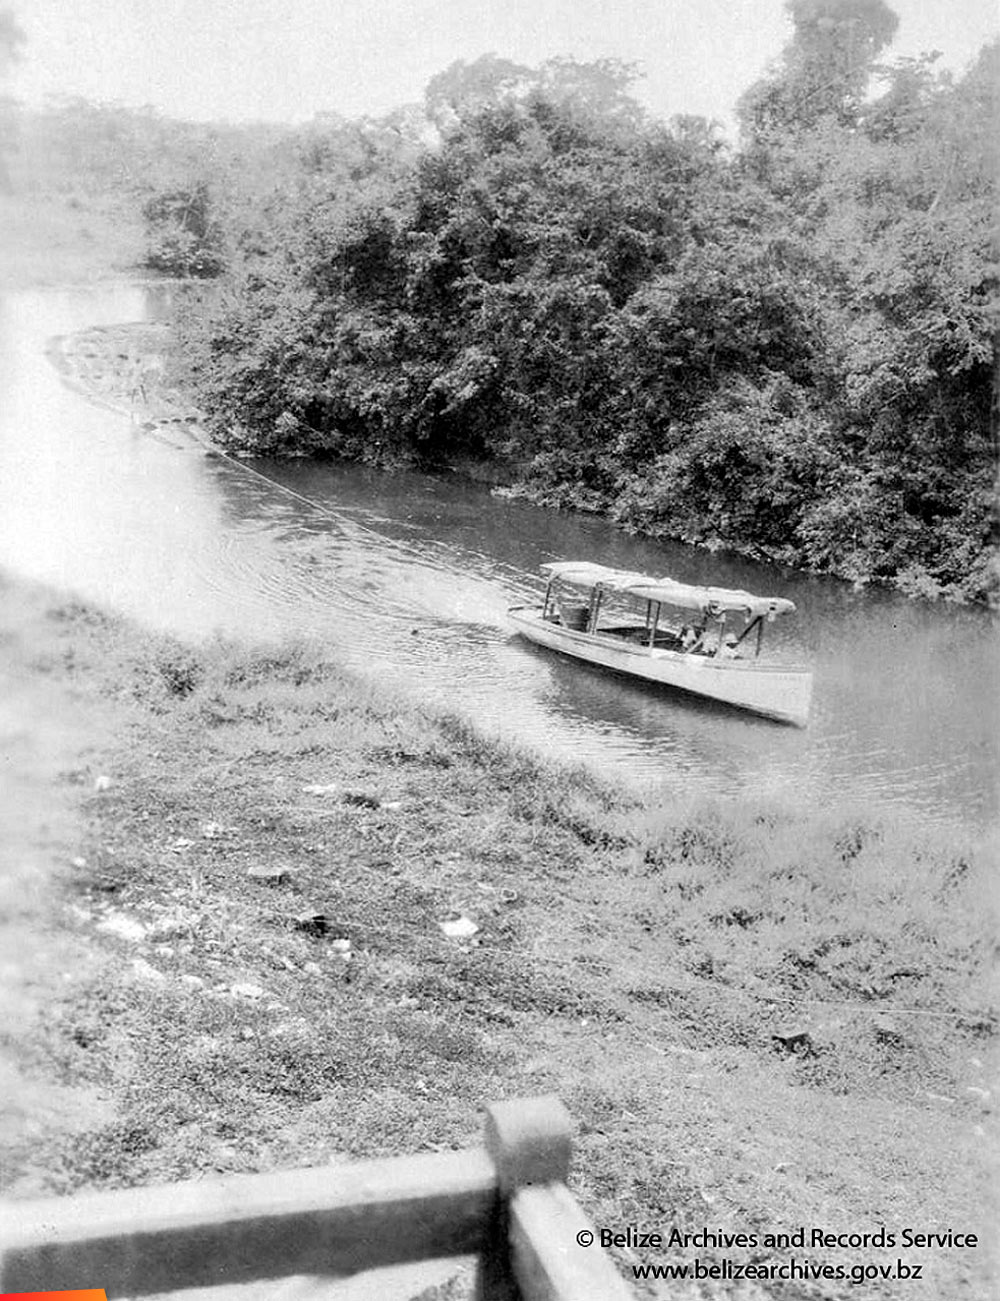 Cayo Boat on the river, early 1900's: The Chicle Industry of Belize